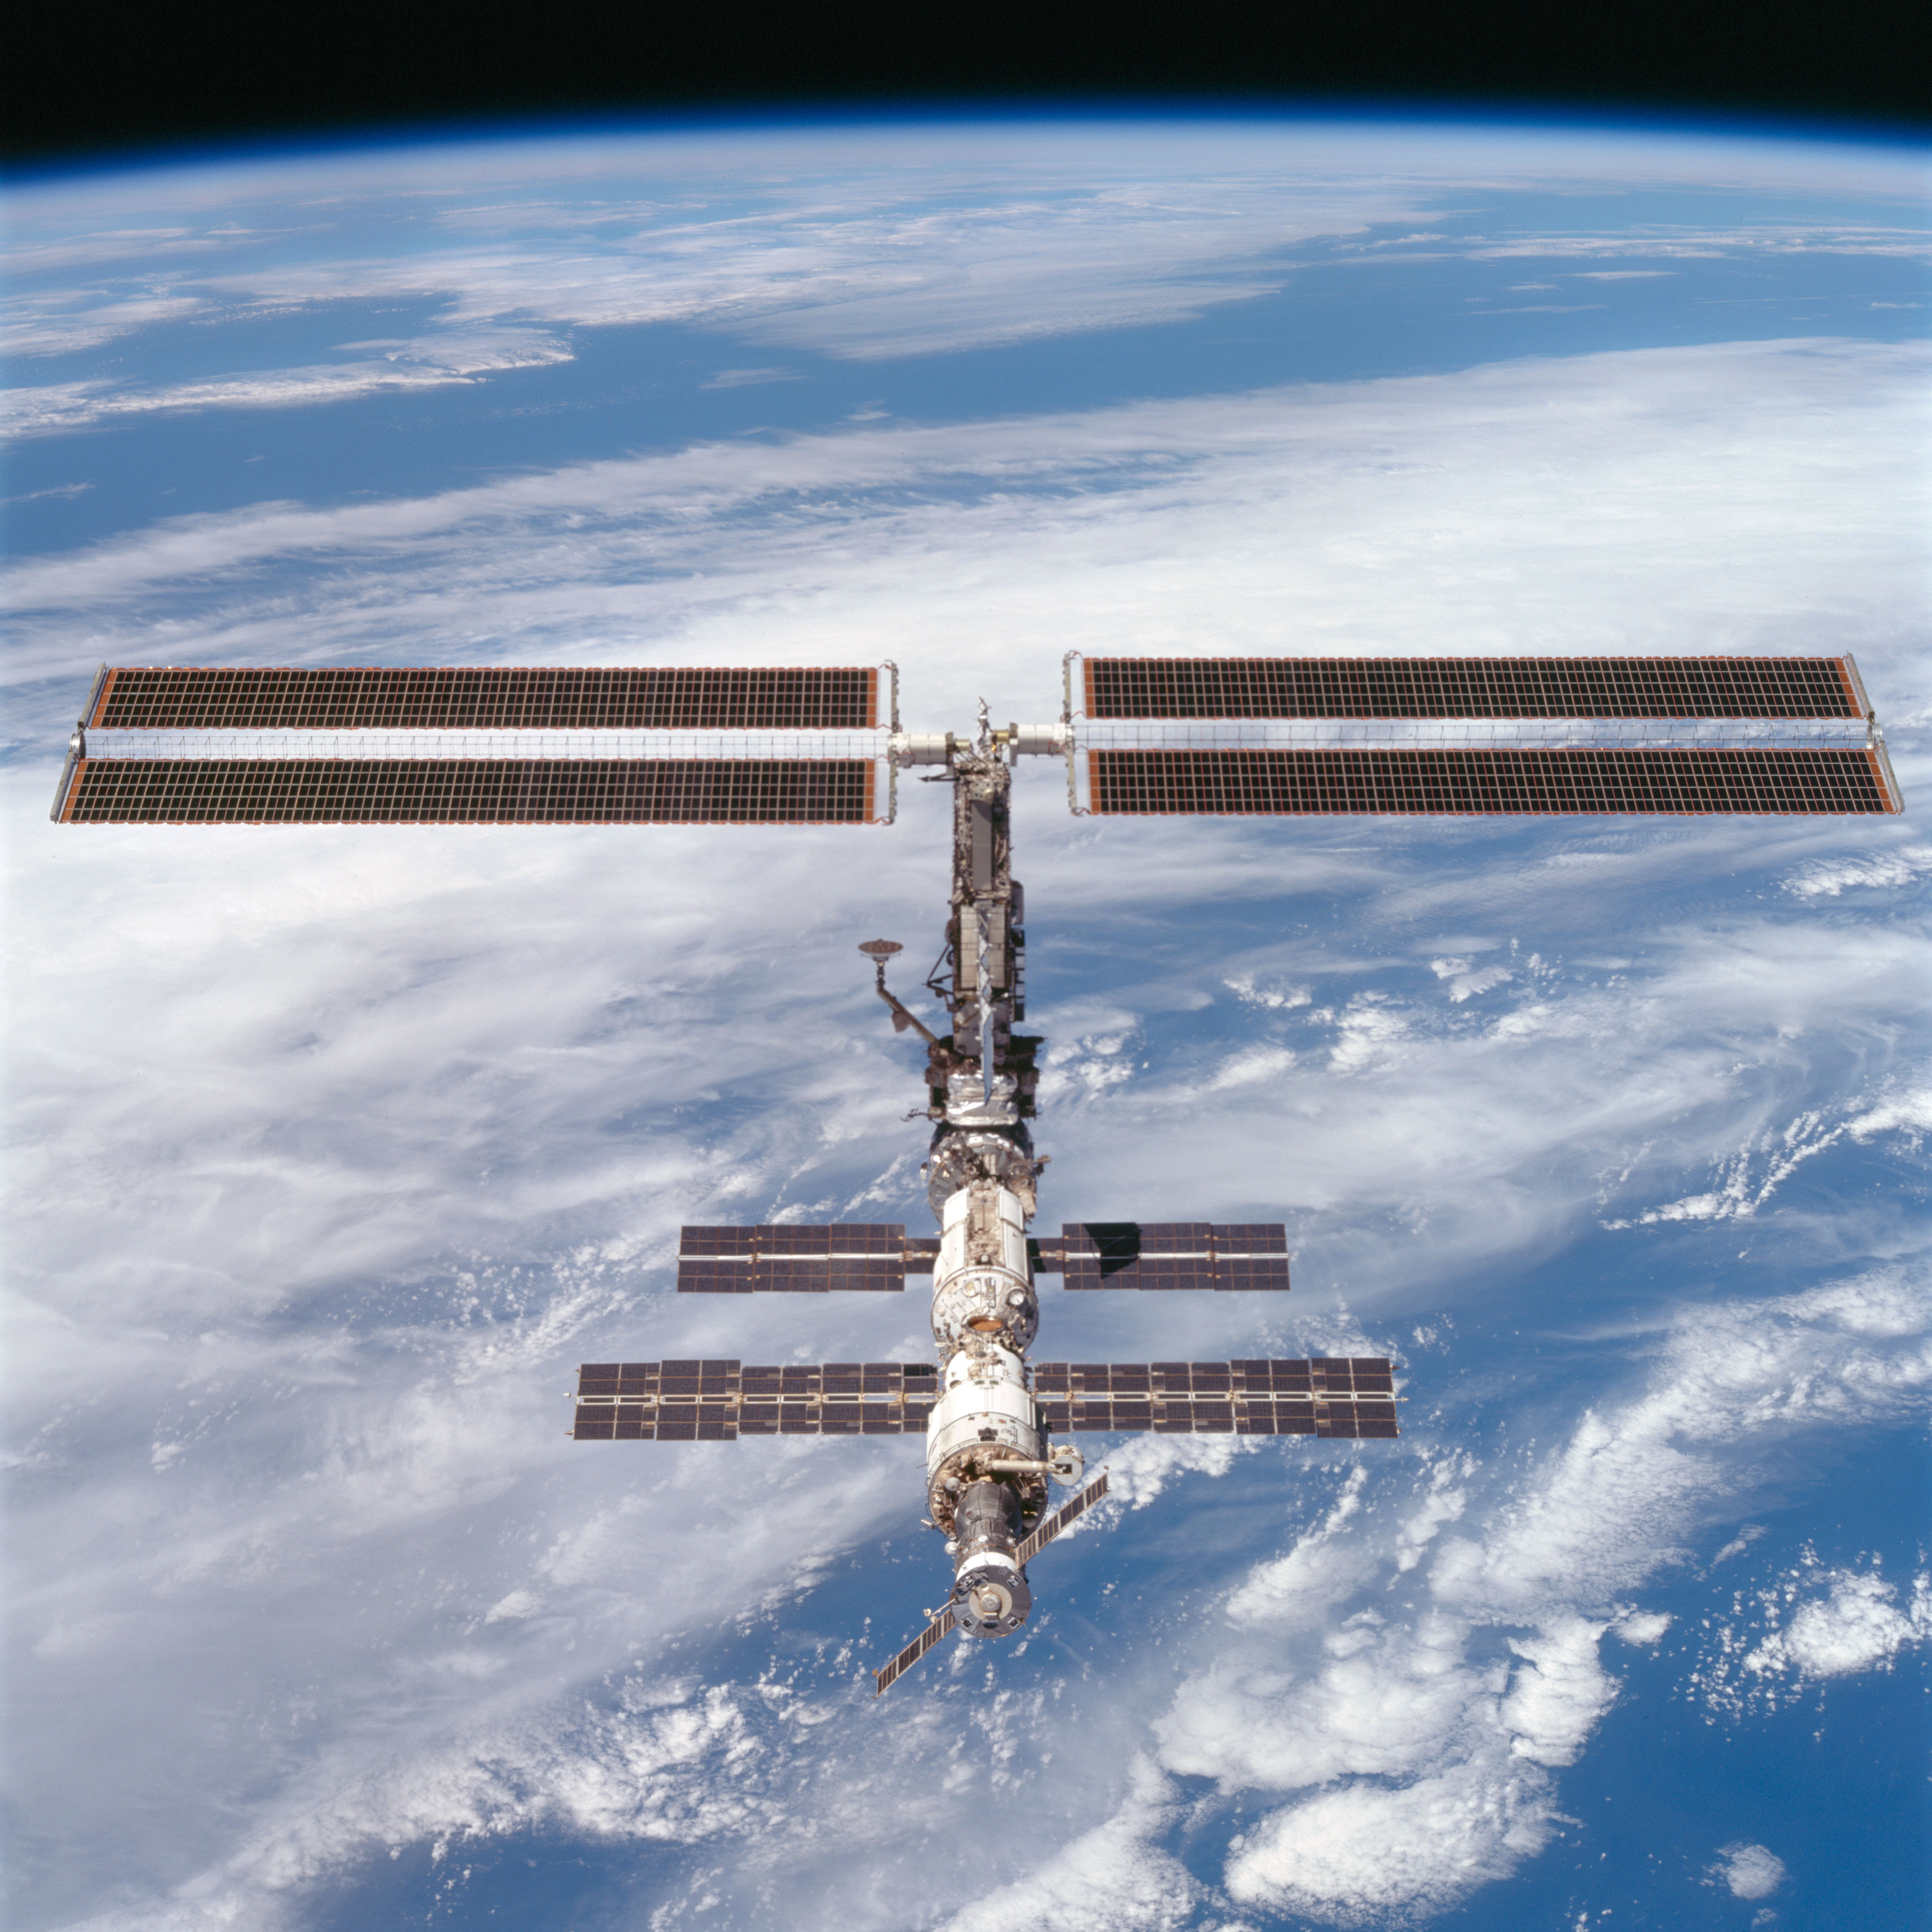 The space station as seen from the departing STS-97 showing the newly deployed P6 solar arrays.